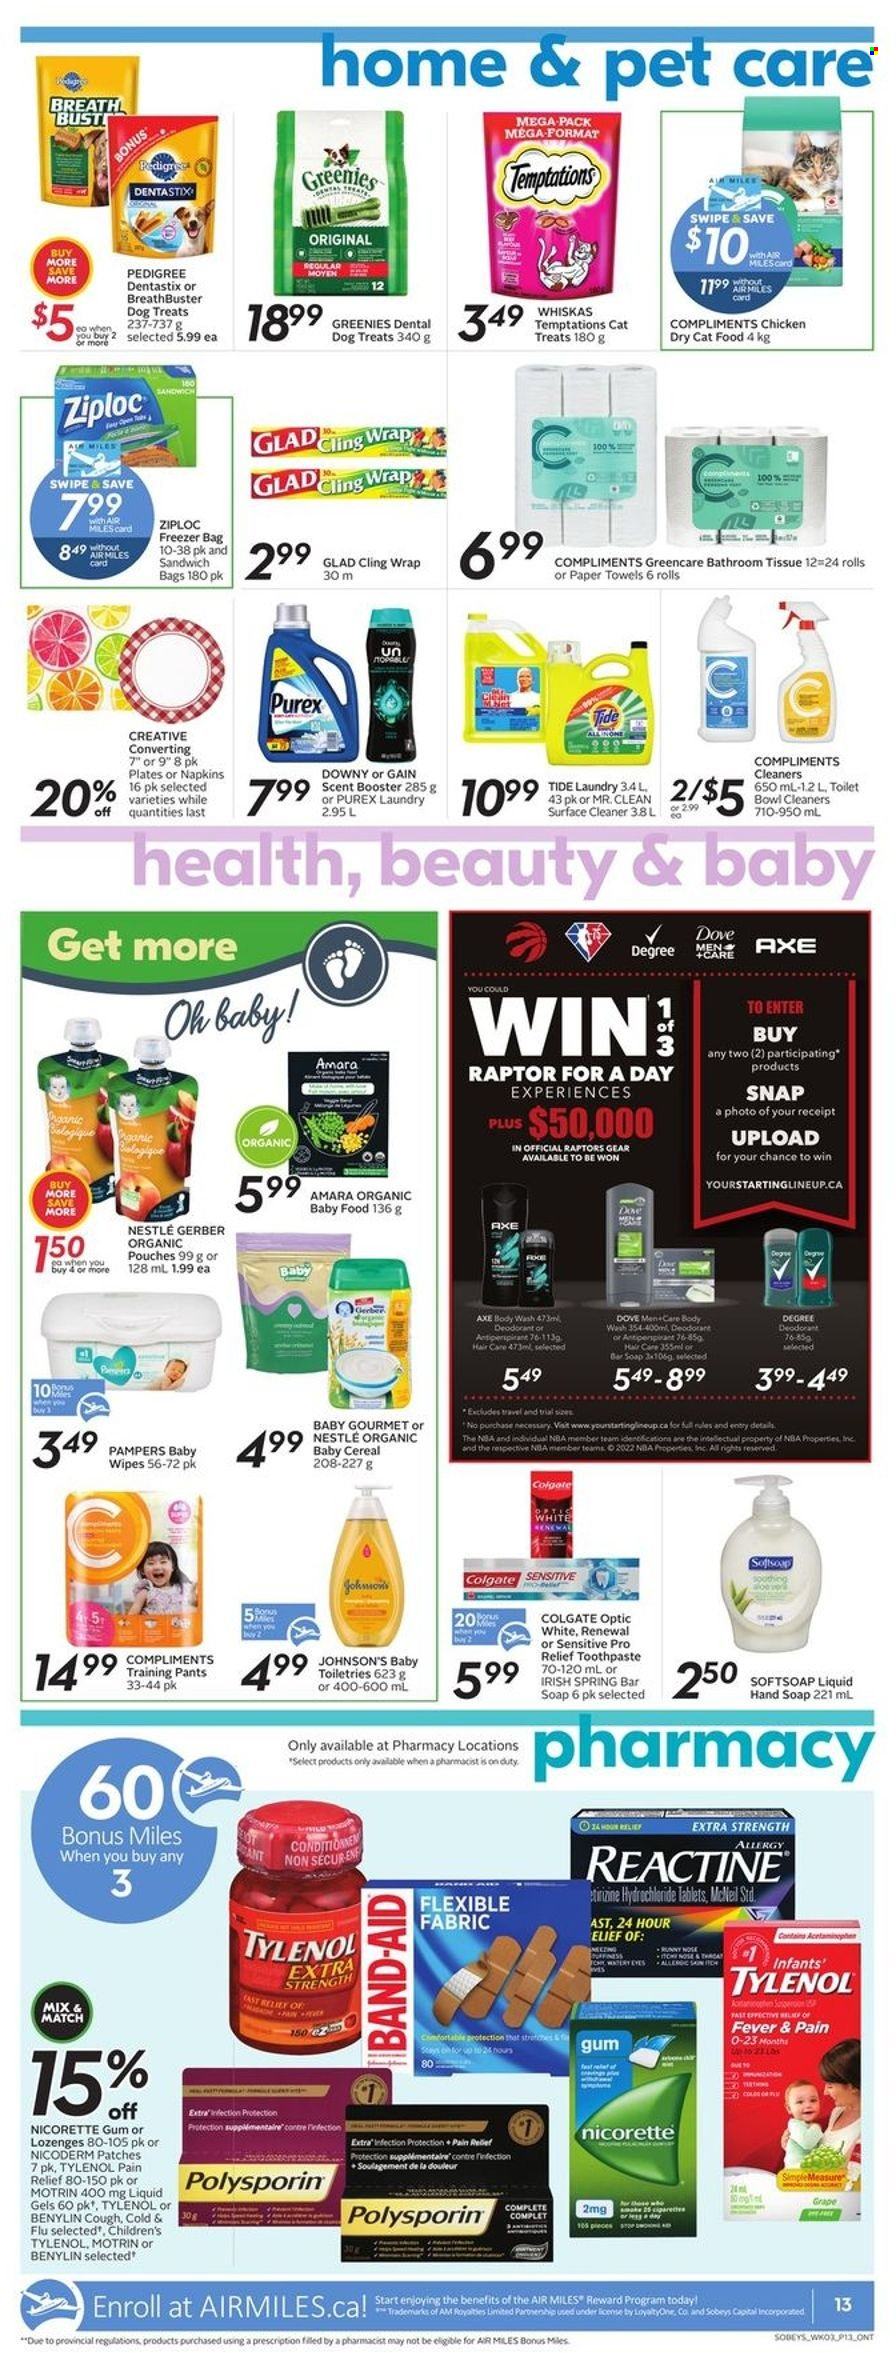 thumbnail - Sobeys Flyer - May 19, 2022 - May 25, 2022 - Sales products - Gerber, cereals, organic baby food, wipes, pants, baby wipes, napkins, Johnson's, baby pants, bath tissue, kitchen towels, paper towels, Gain, surface cleaner, cleaner, Tide, Purex, body wash, Softsoap, hand soap, soap bar, soap, toothpaste, anti-perspirant, Axe, Ziploc, animal food, Greenies, cat food, Dentastix, Pedigree, dry cat food, pain relief, Cold & Flu, NicoDerm, Nicorette, Tylenol, Nicorette Gum, Benylin, Motrin, band-aid, Dove, Colgate, Nestlé, Pampers, Whiskas, deodorant. Page 14.